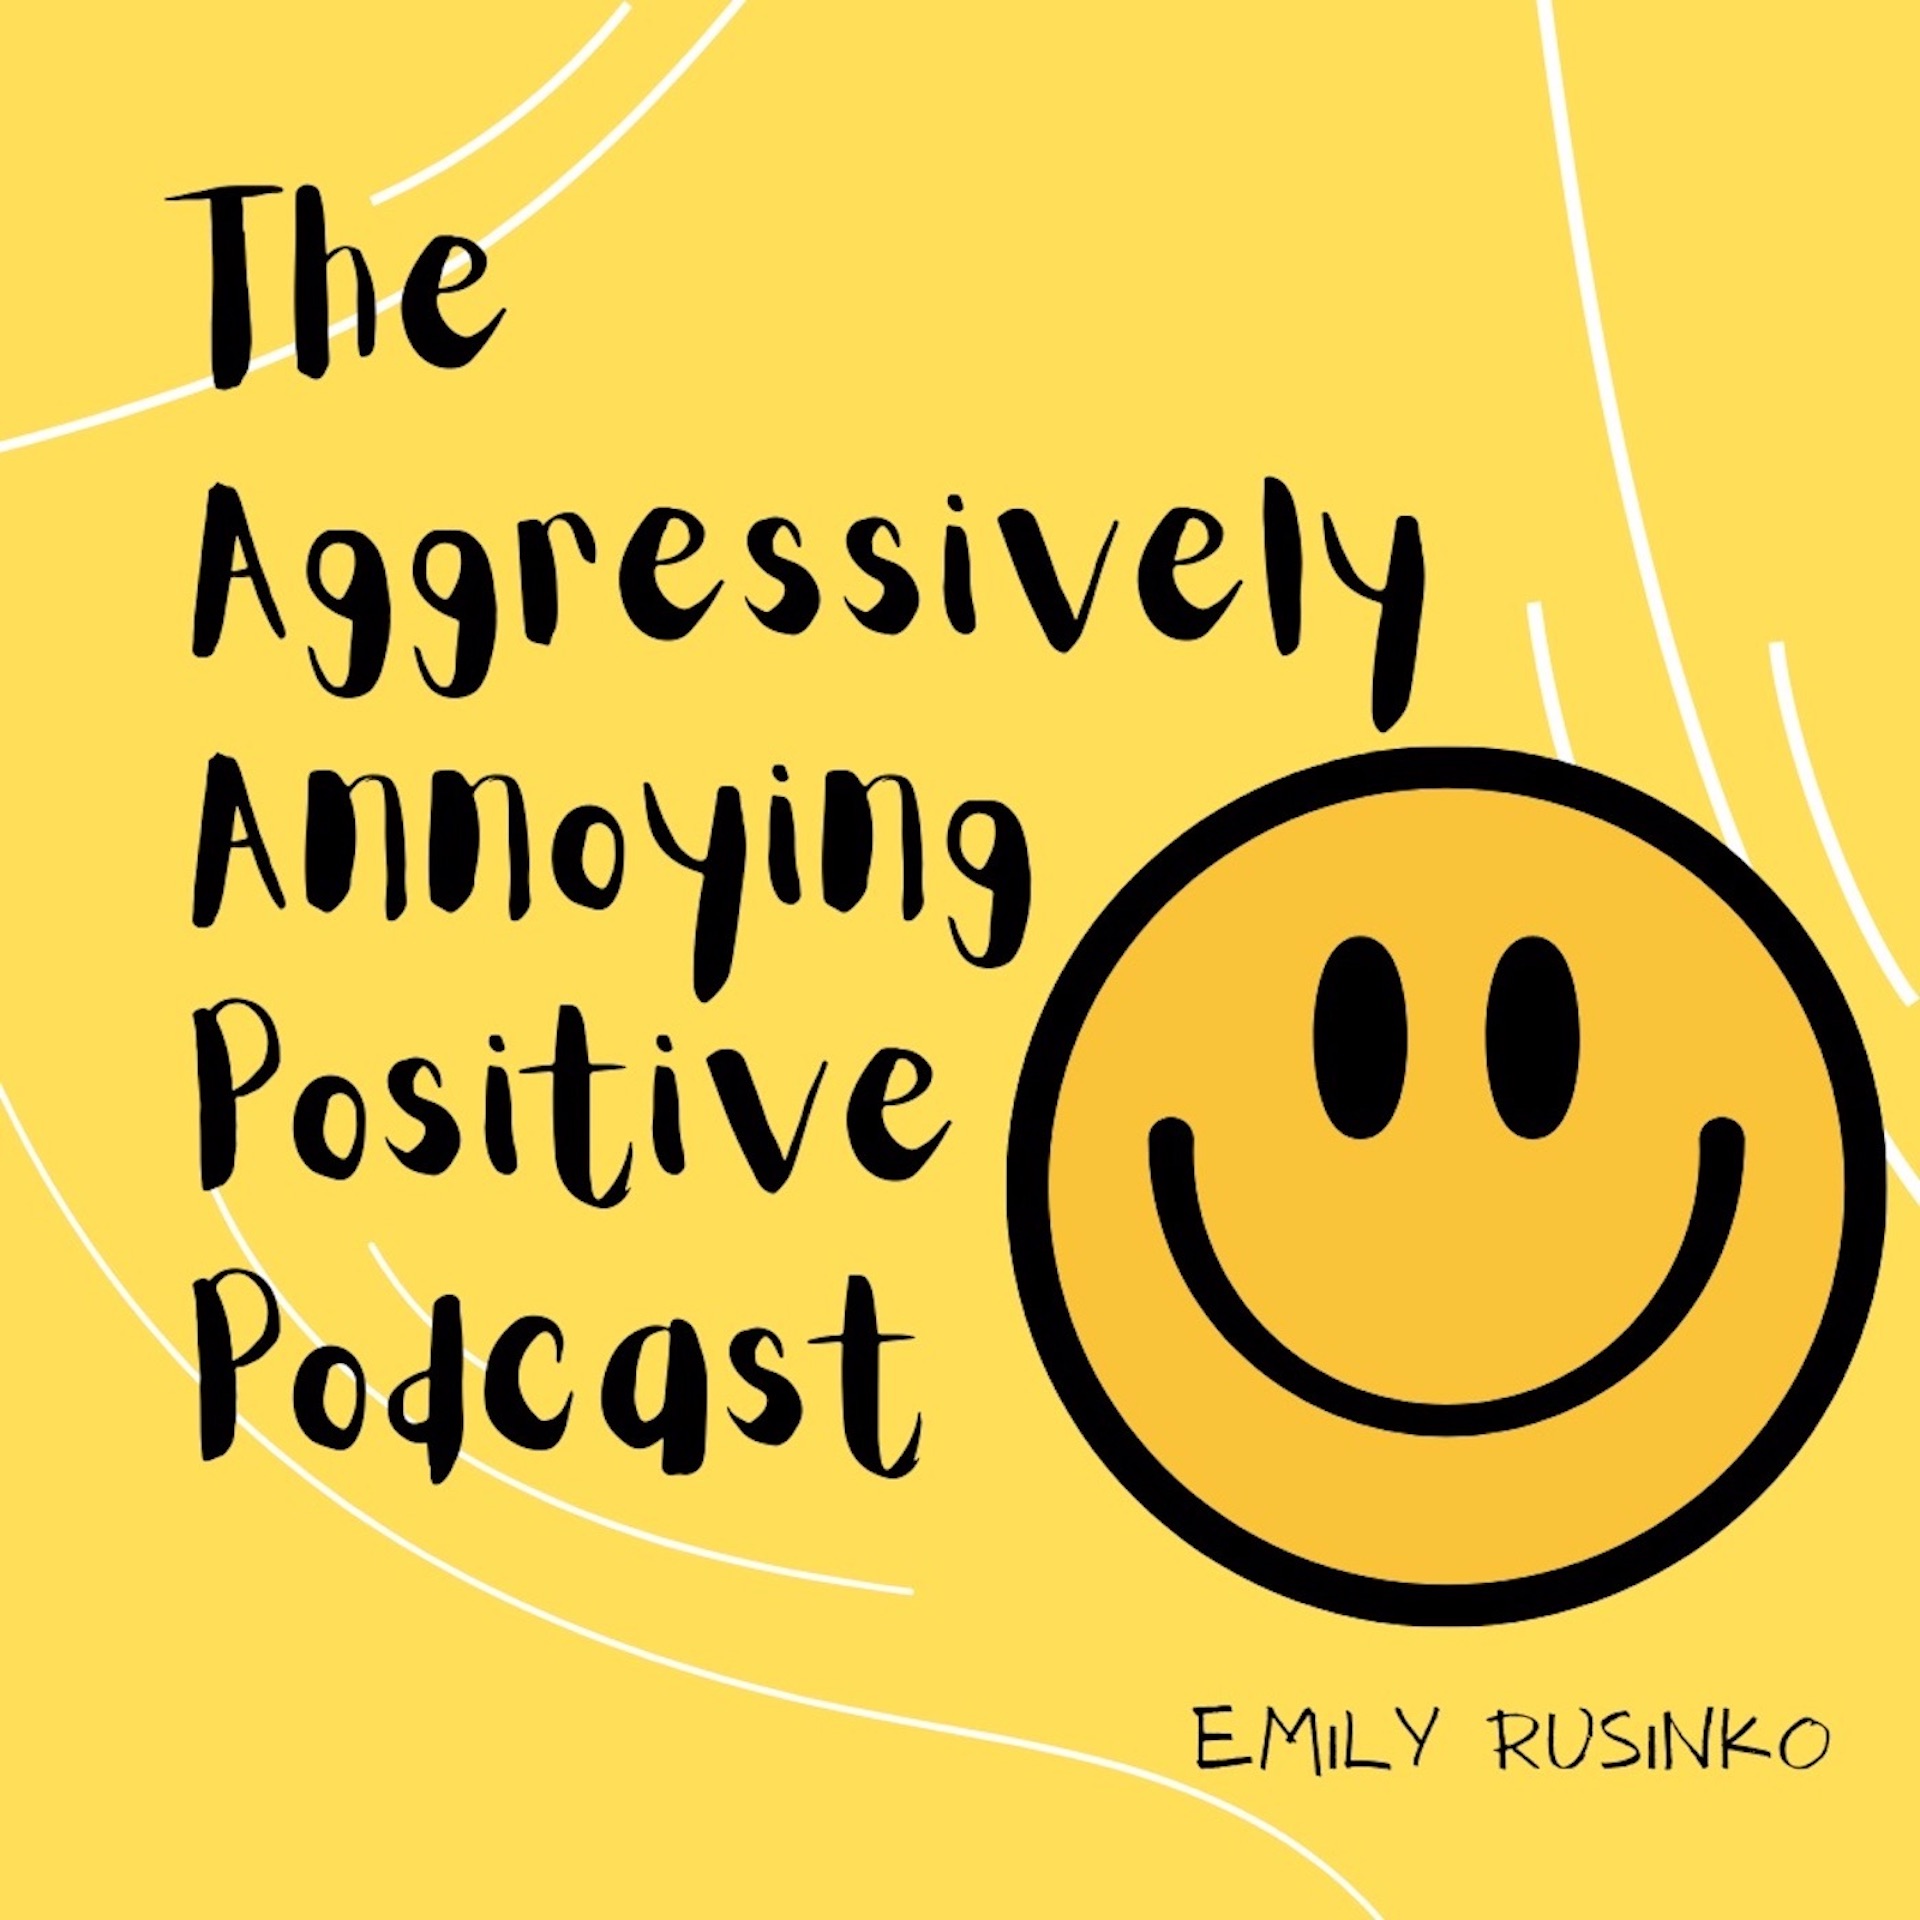 The Aggressively Annoying Positive Podcast